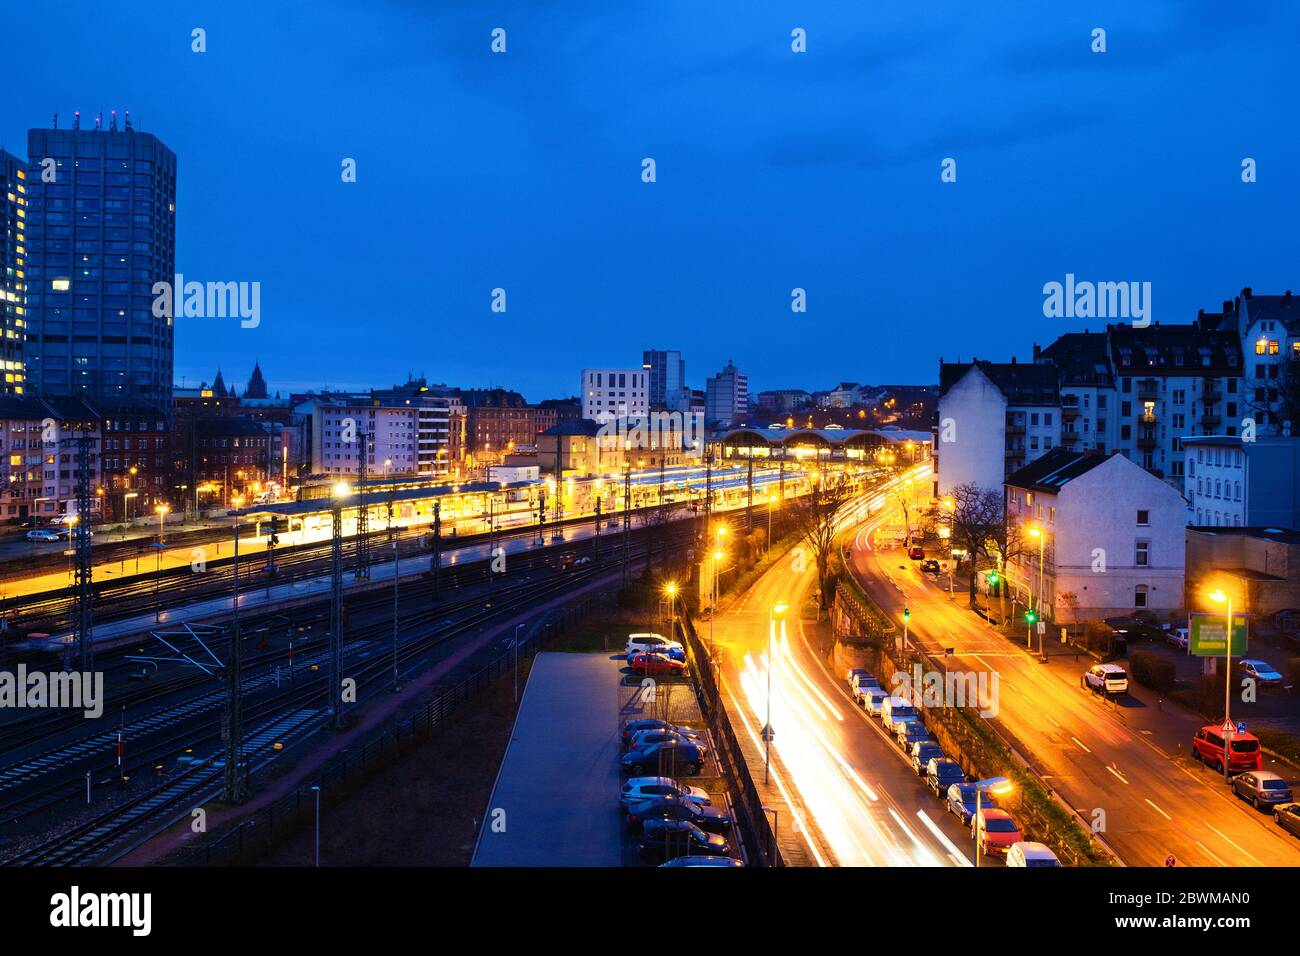 Mainz, Germany. Main train station in Mainz, Germany at night. Illuminated streets with modern buildings Stock Photo